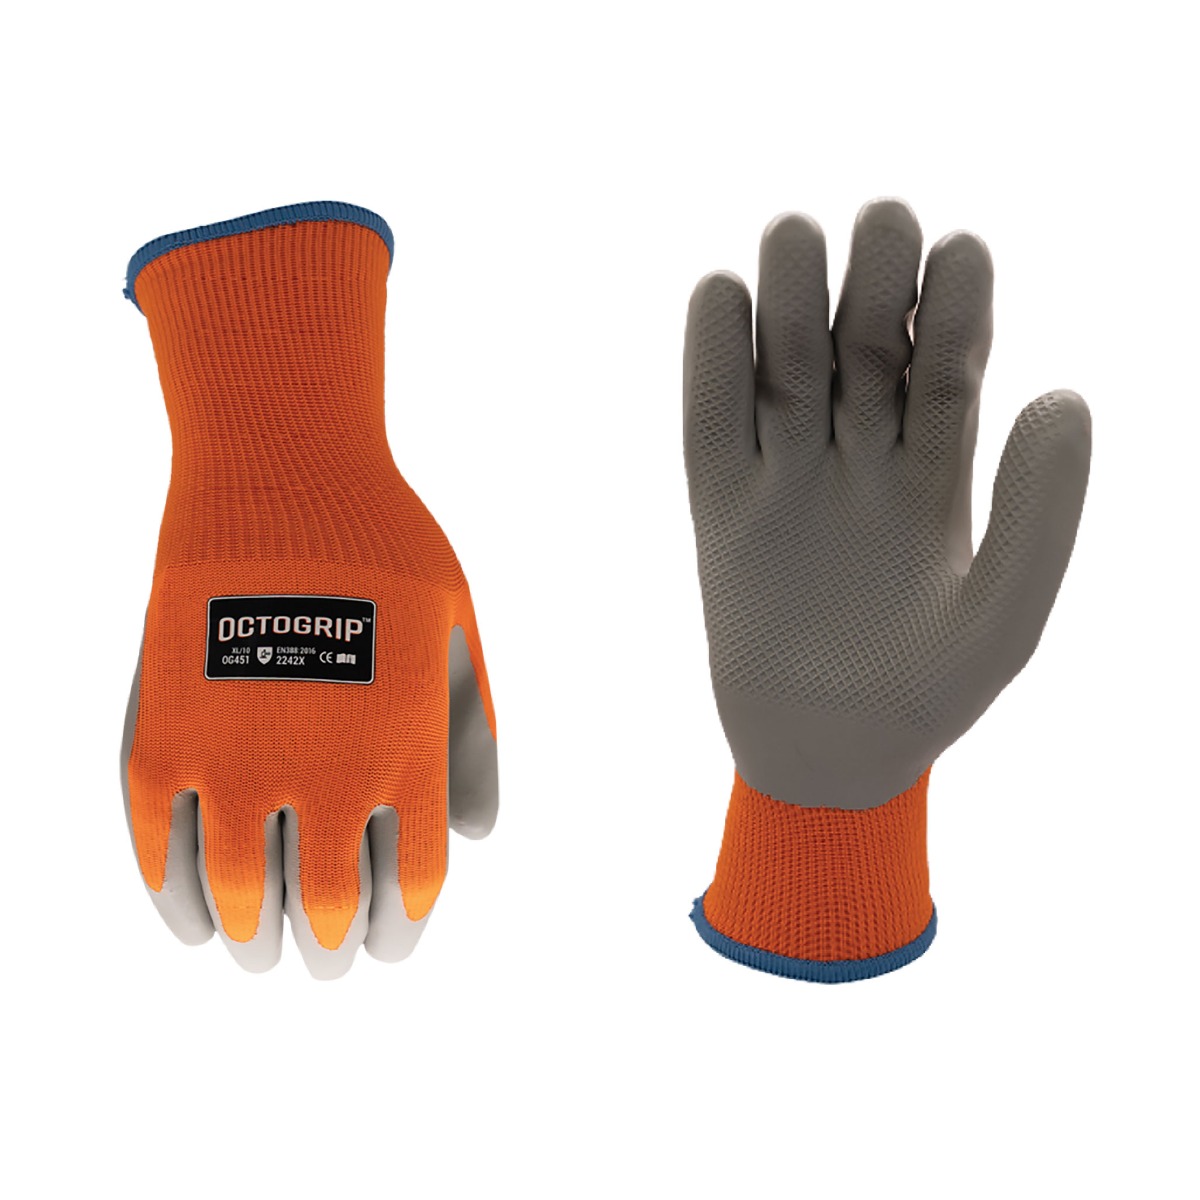 Cold Weather Winter Series Glove 10g - Size M